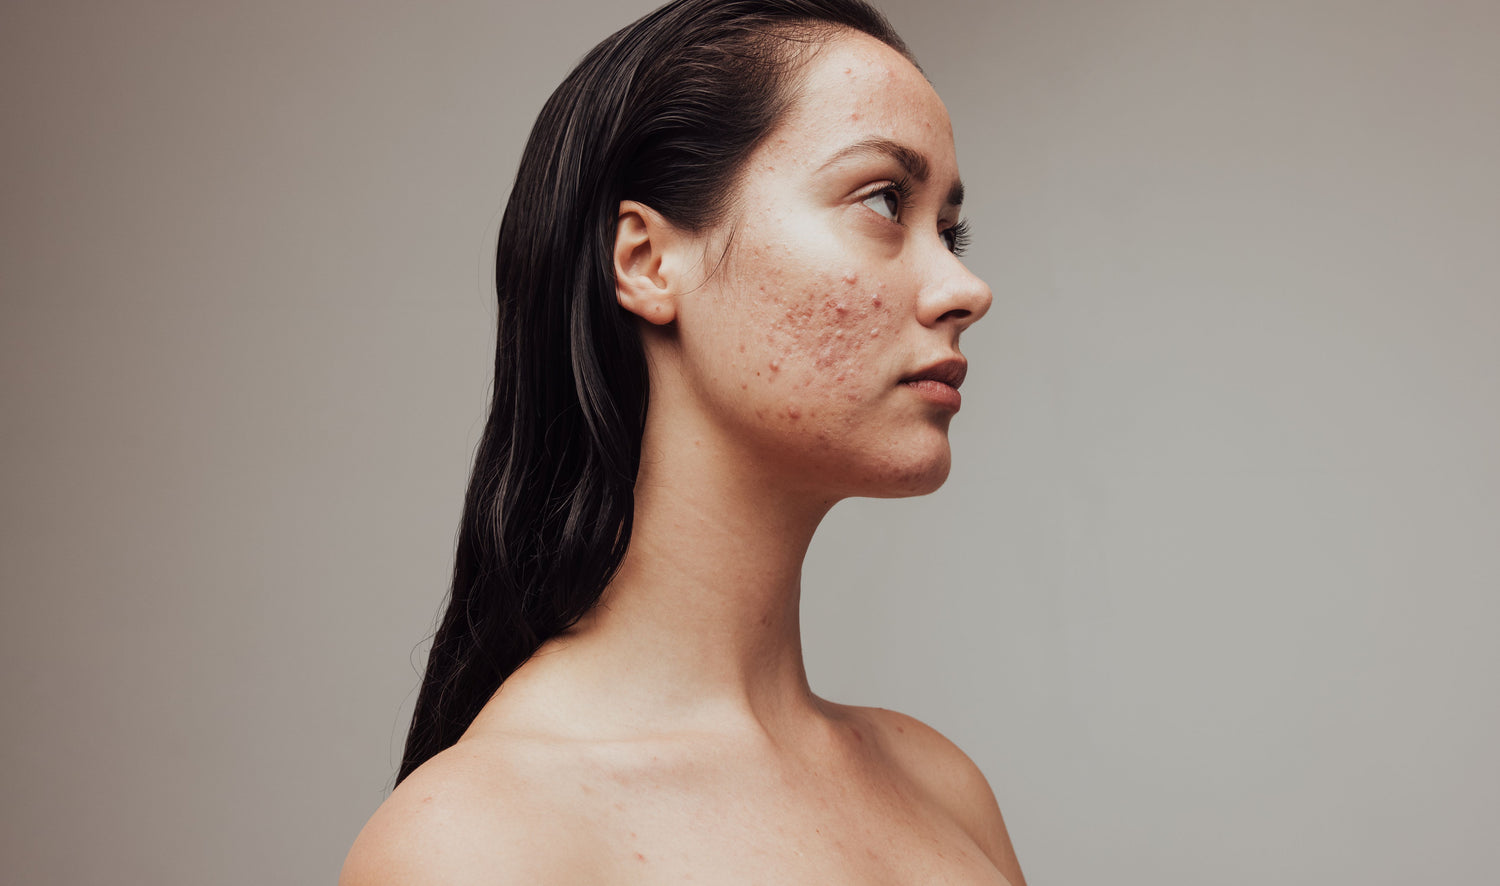 Major Differences Between Pimples And Acne